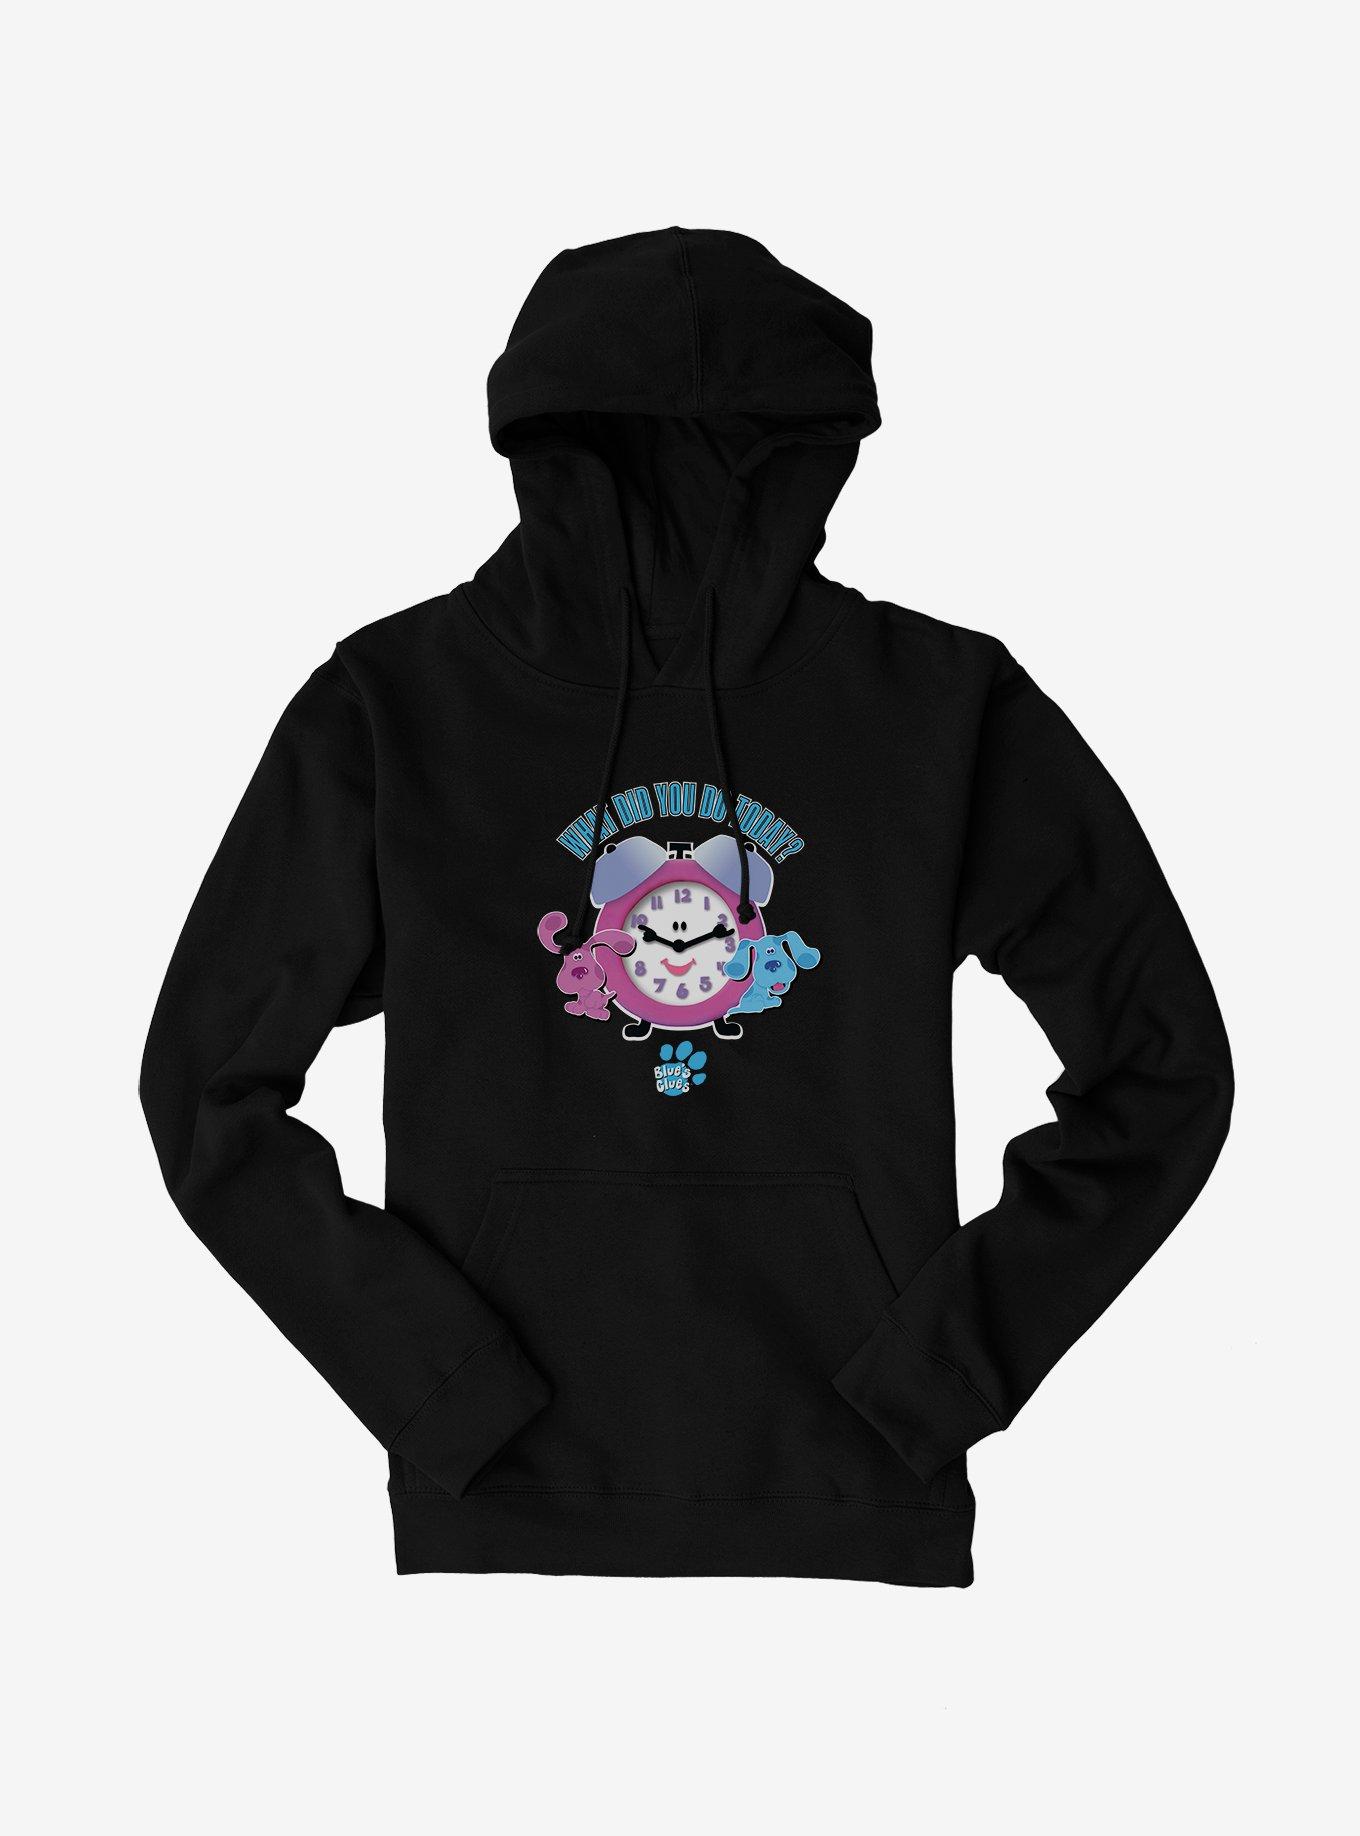 Blue's Clues Tickety What Did You Do Today? Hoodie, , hi-res